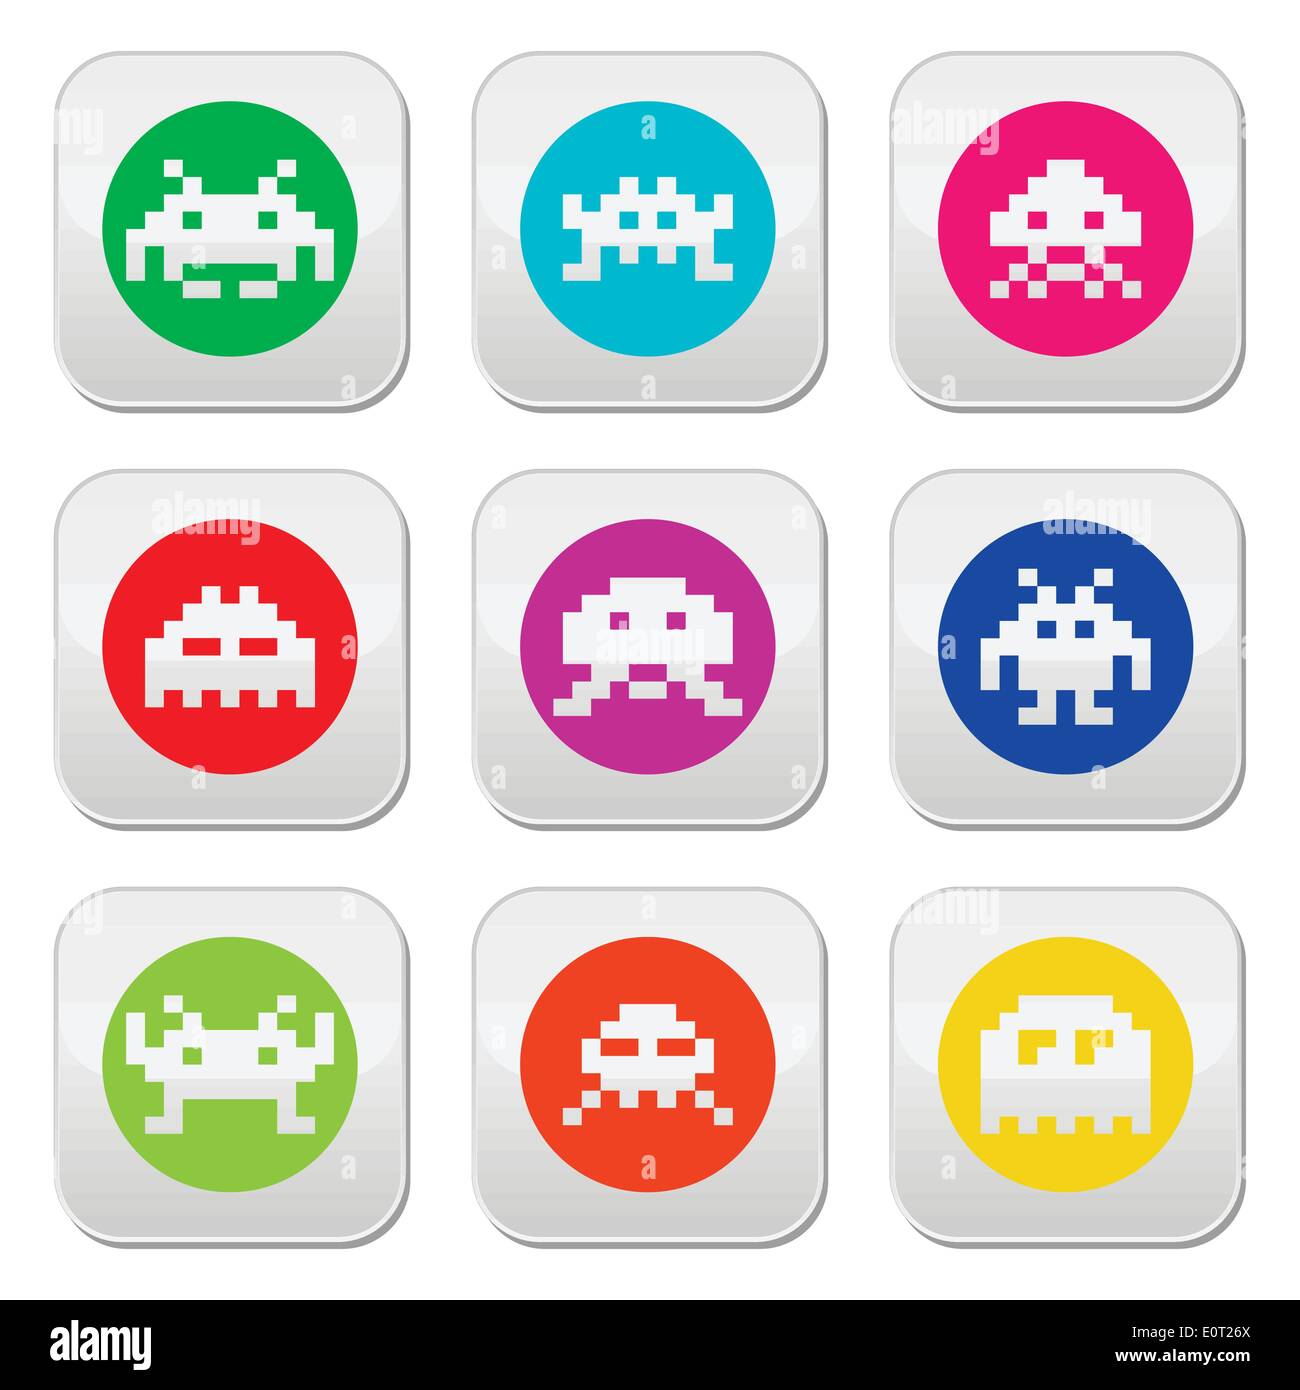 Space invaders, 8-bit aliens round icons set Stock Vector